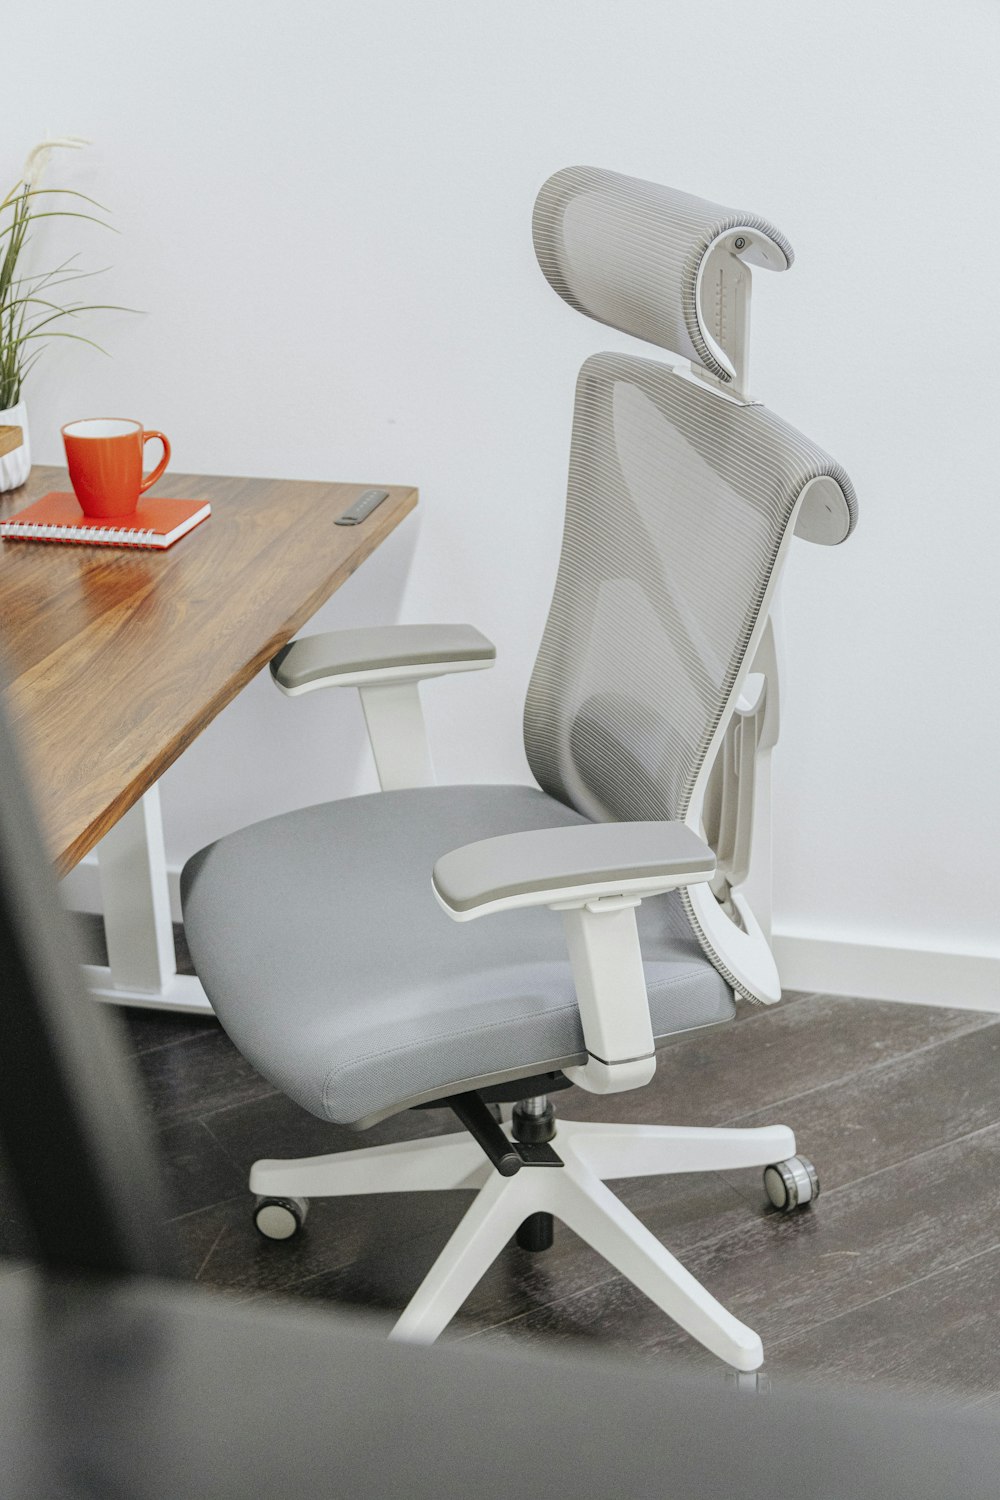 a gray office chair sitting next to a wooden table